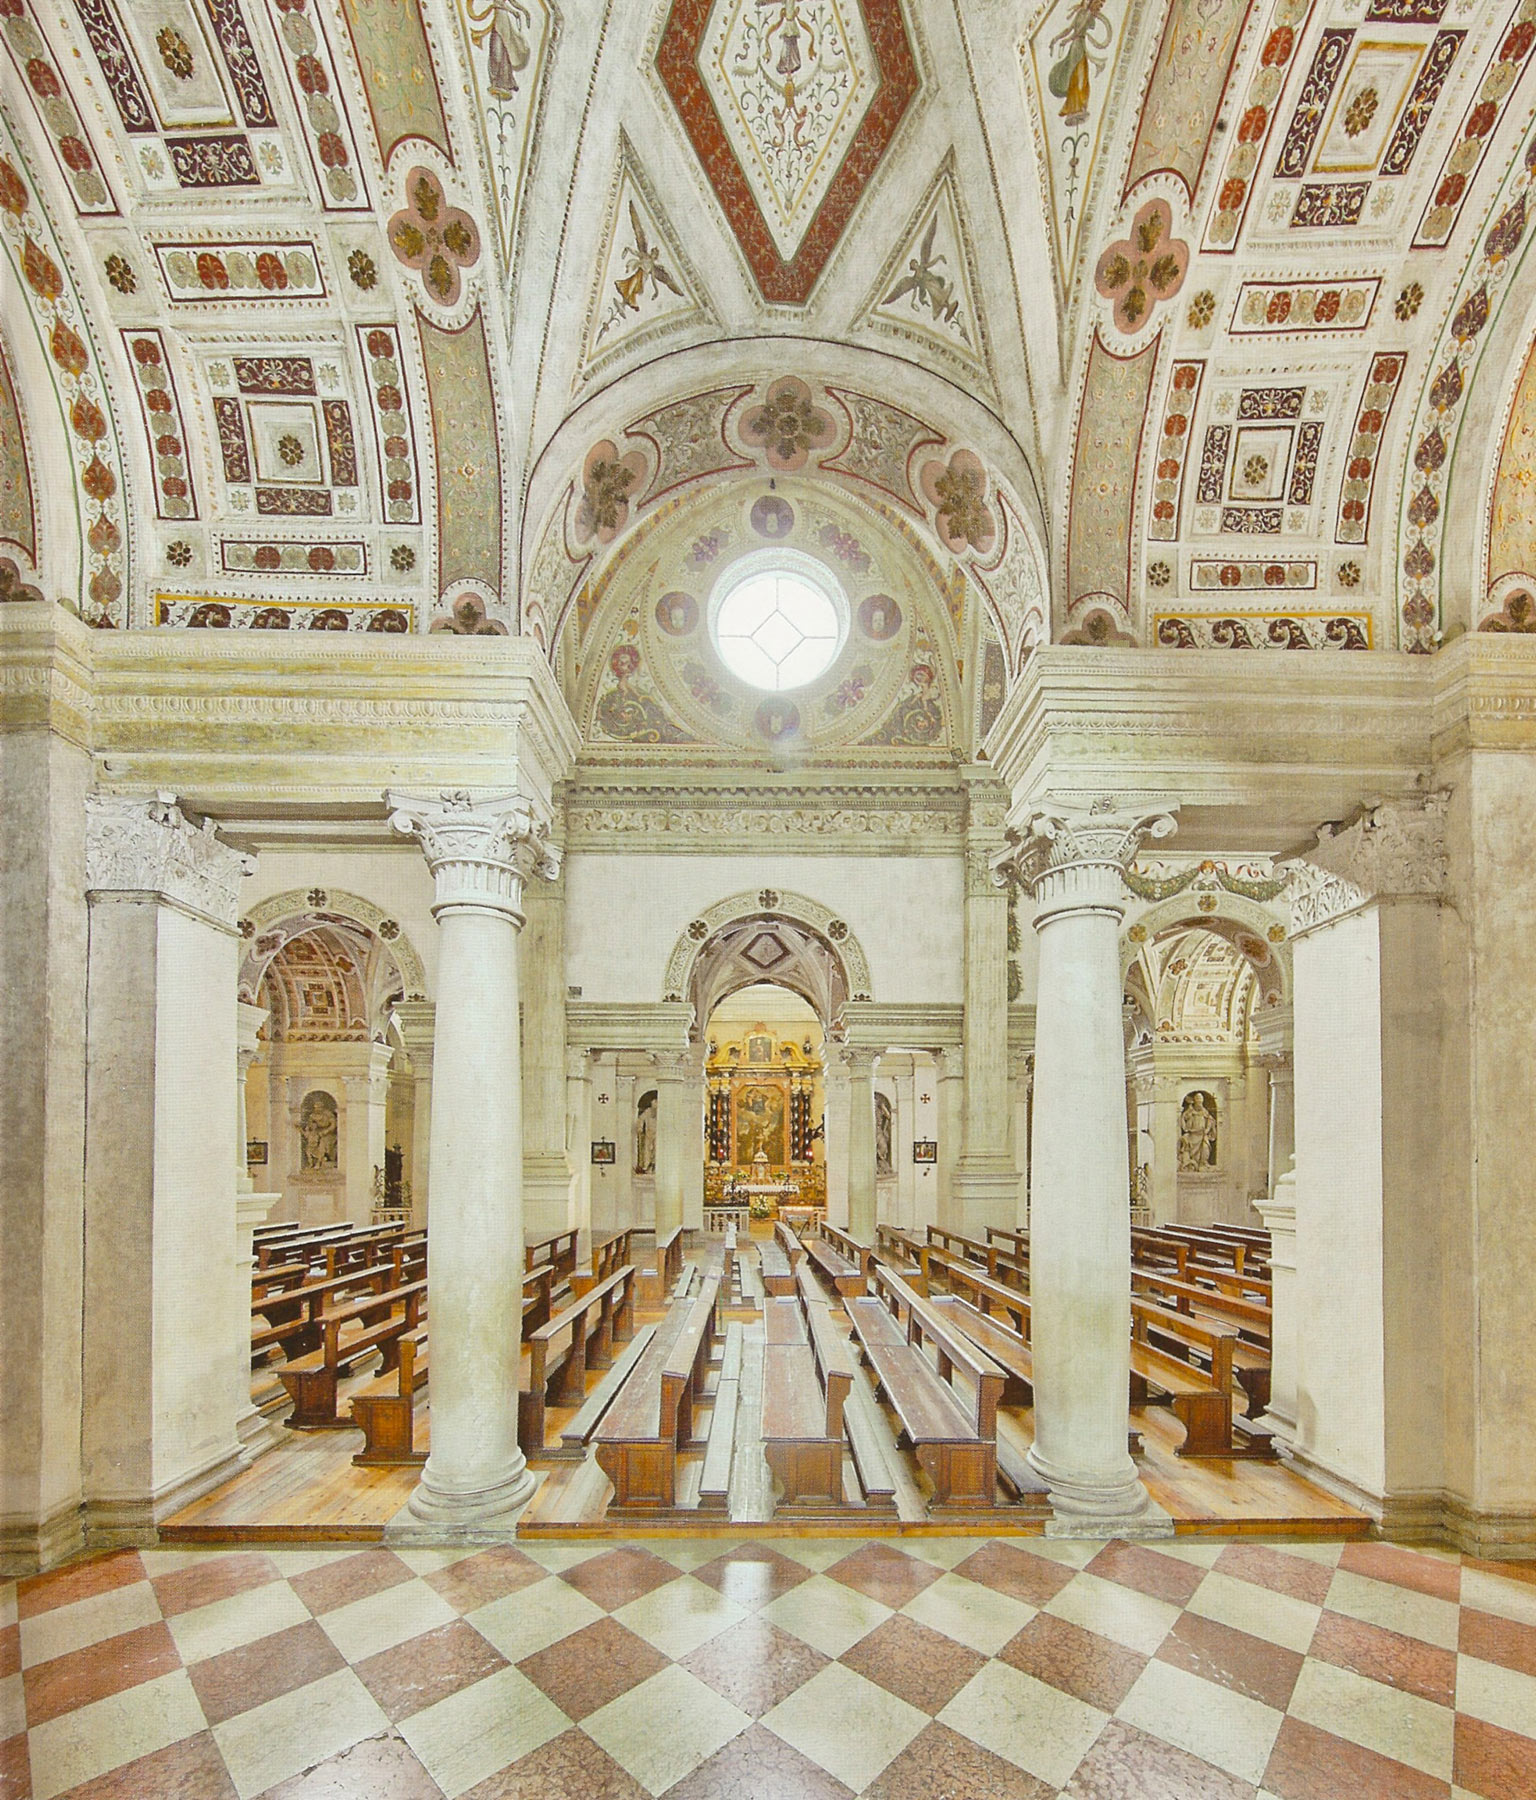 The interior of the abbey church of the monastery of Polirone